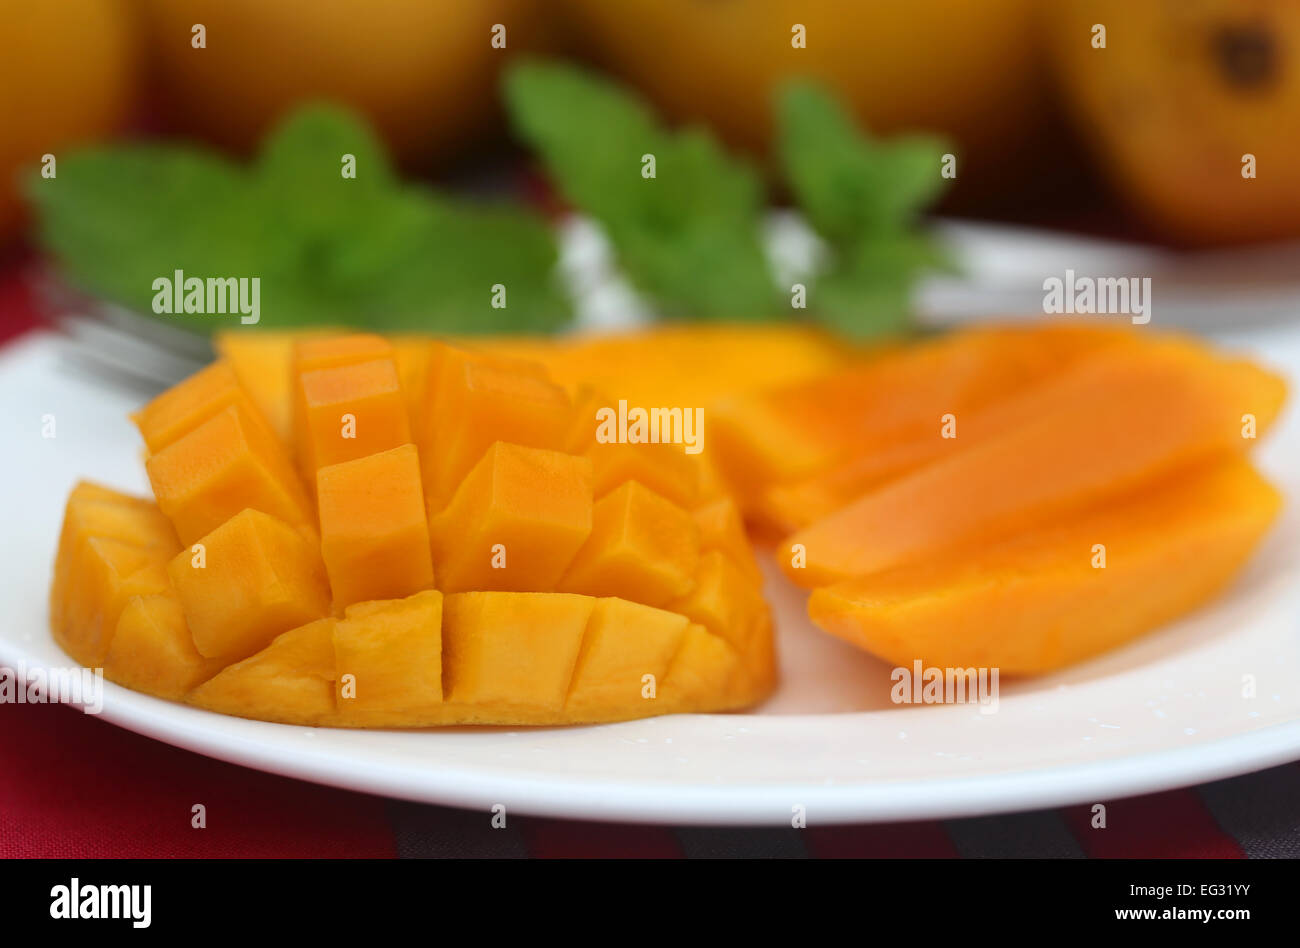 Ripe mangoes with mint leaves on a plate Stock Photo